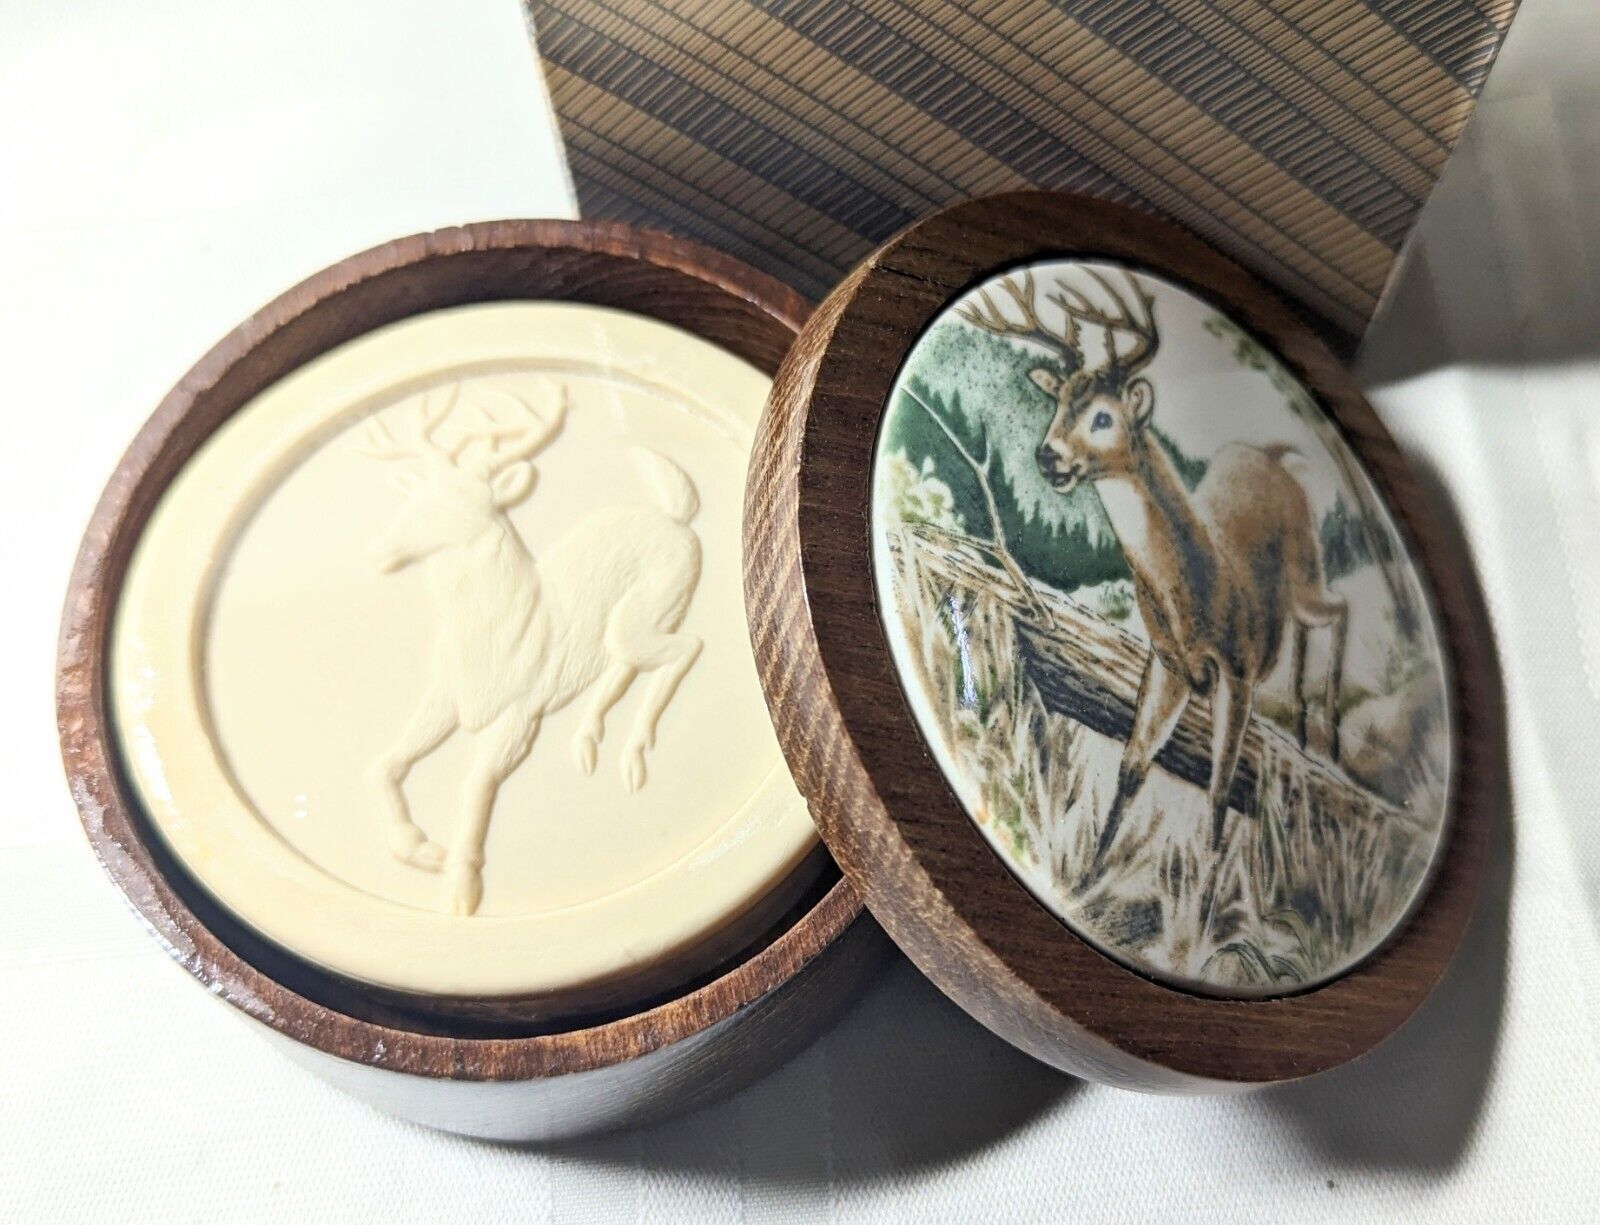 NEW Avon Gift Collection Wilderness Box with Soap VINTAGE